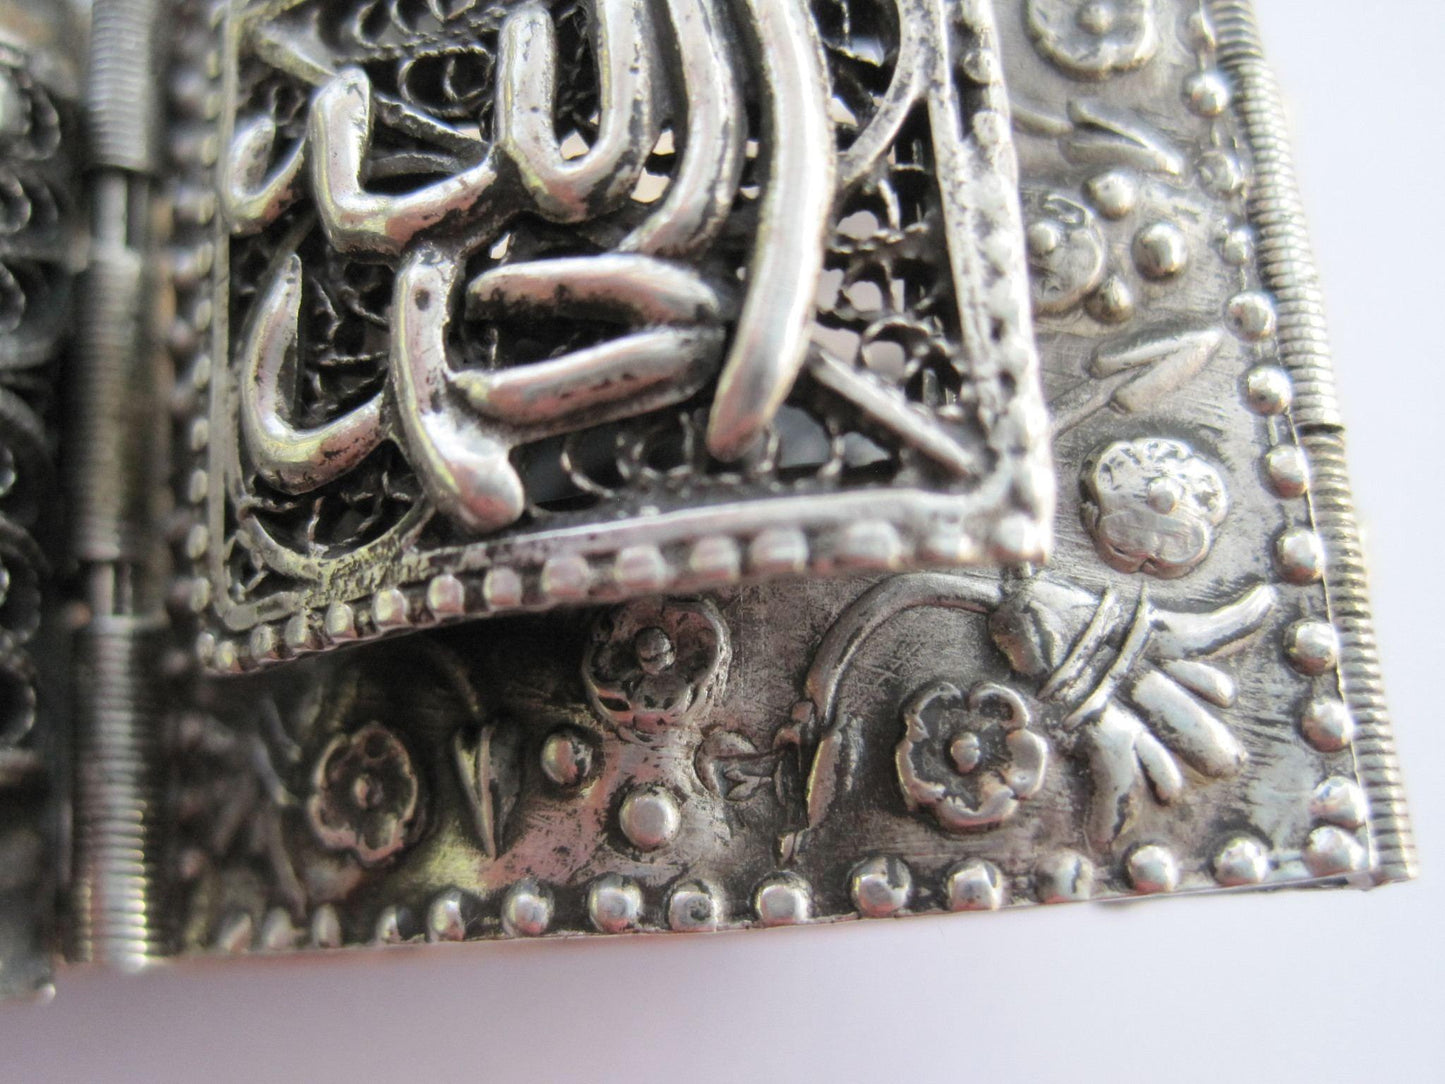 Vintage Egyptian Panel Bracelet made with 800 Silver in the 1930s or 1940s - Anteeka